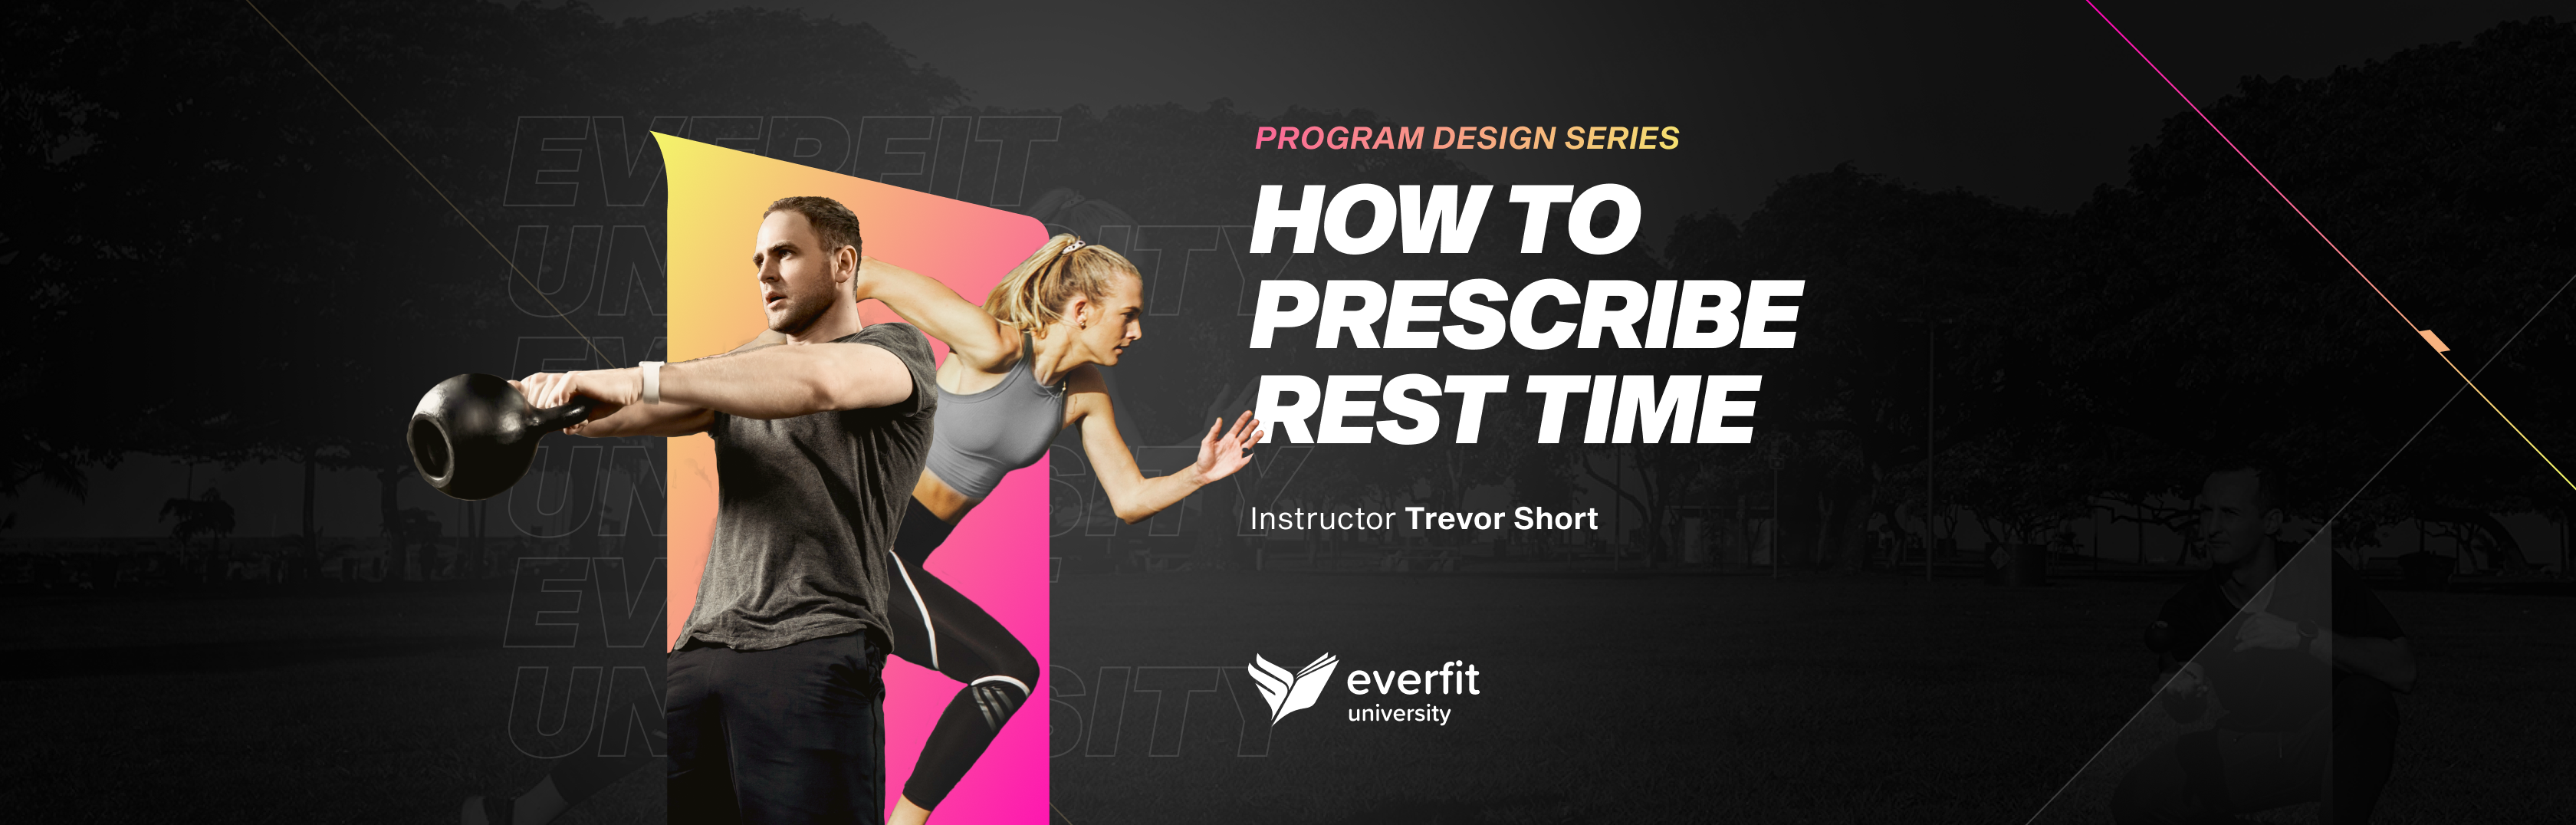 How to prescribe Rest Time